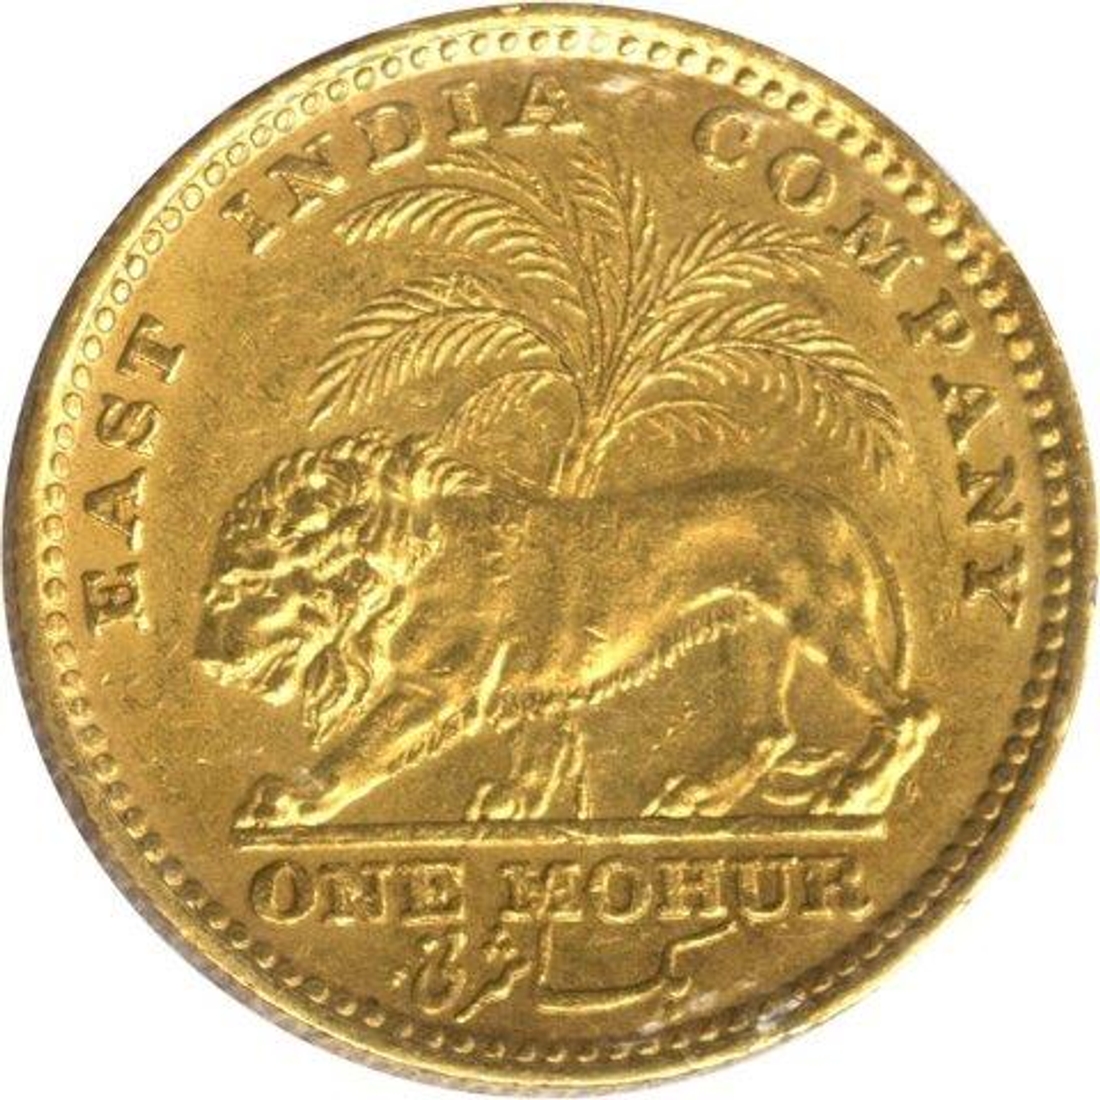 Rare Gold Mohur  Coin of King William IIII of Calcutta Mint of 1835.